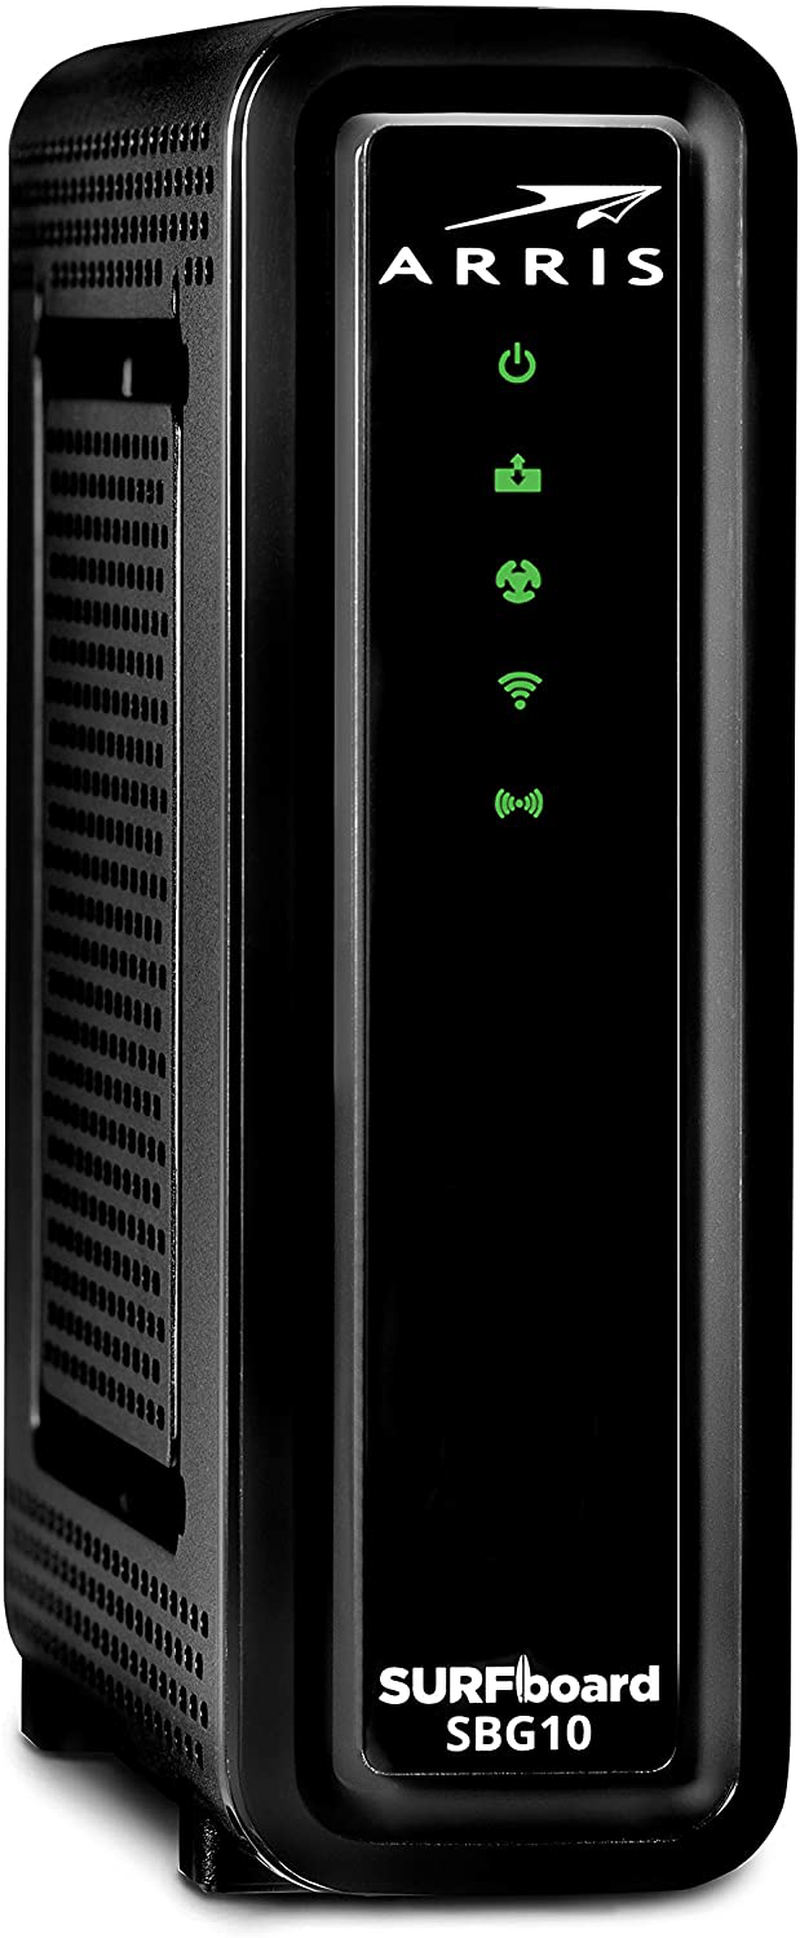 ARRIS SURFboard SBG10 DOCSIS 3.0 Cable Modem & AC1600 Dual Band Wi-Fi Router, Approved for Cox, Spectrum, Xfinity & others (black) Electronics > Networking > Modems ARRIS   